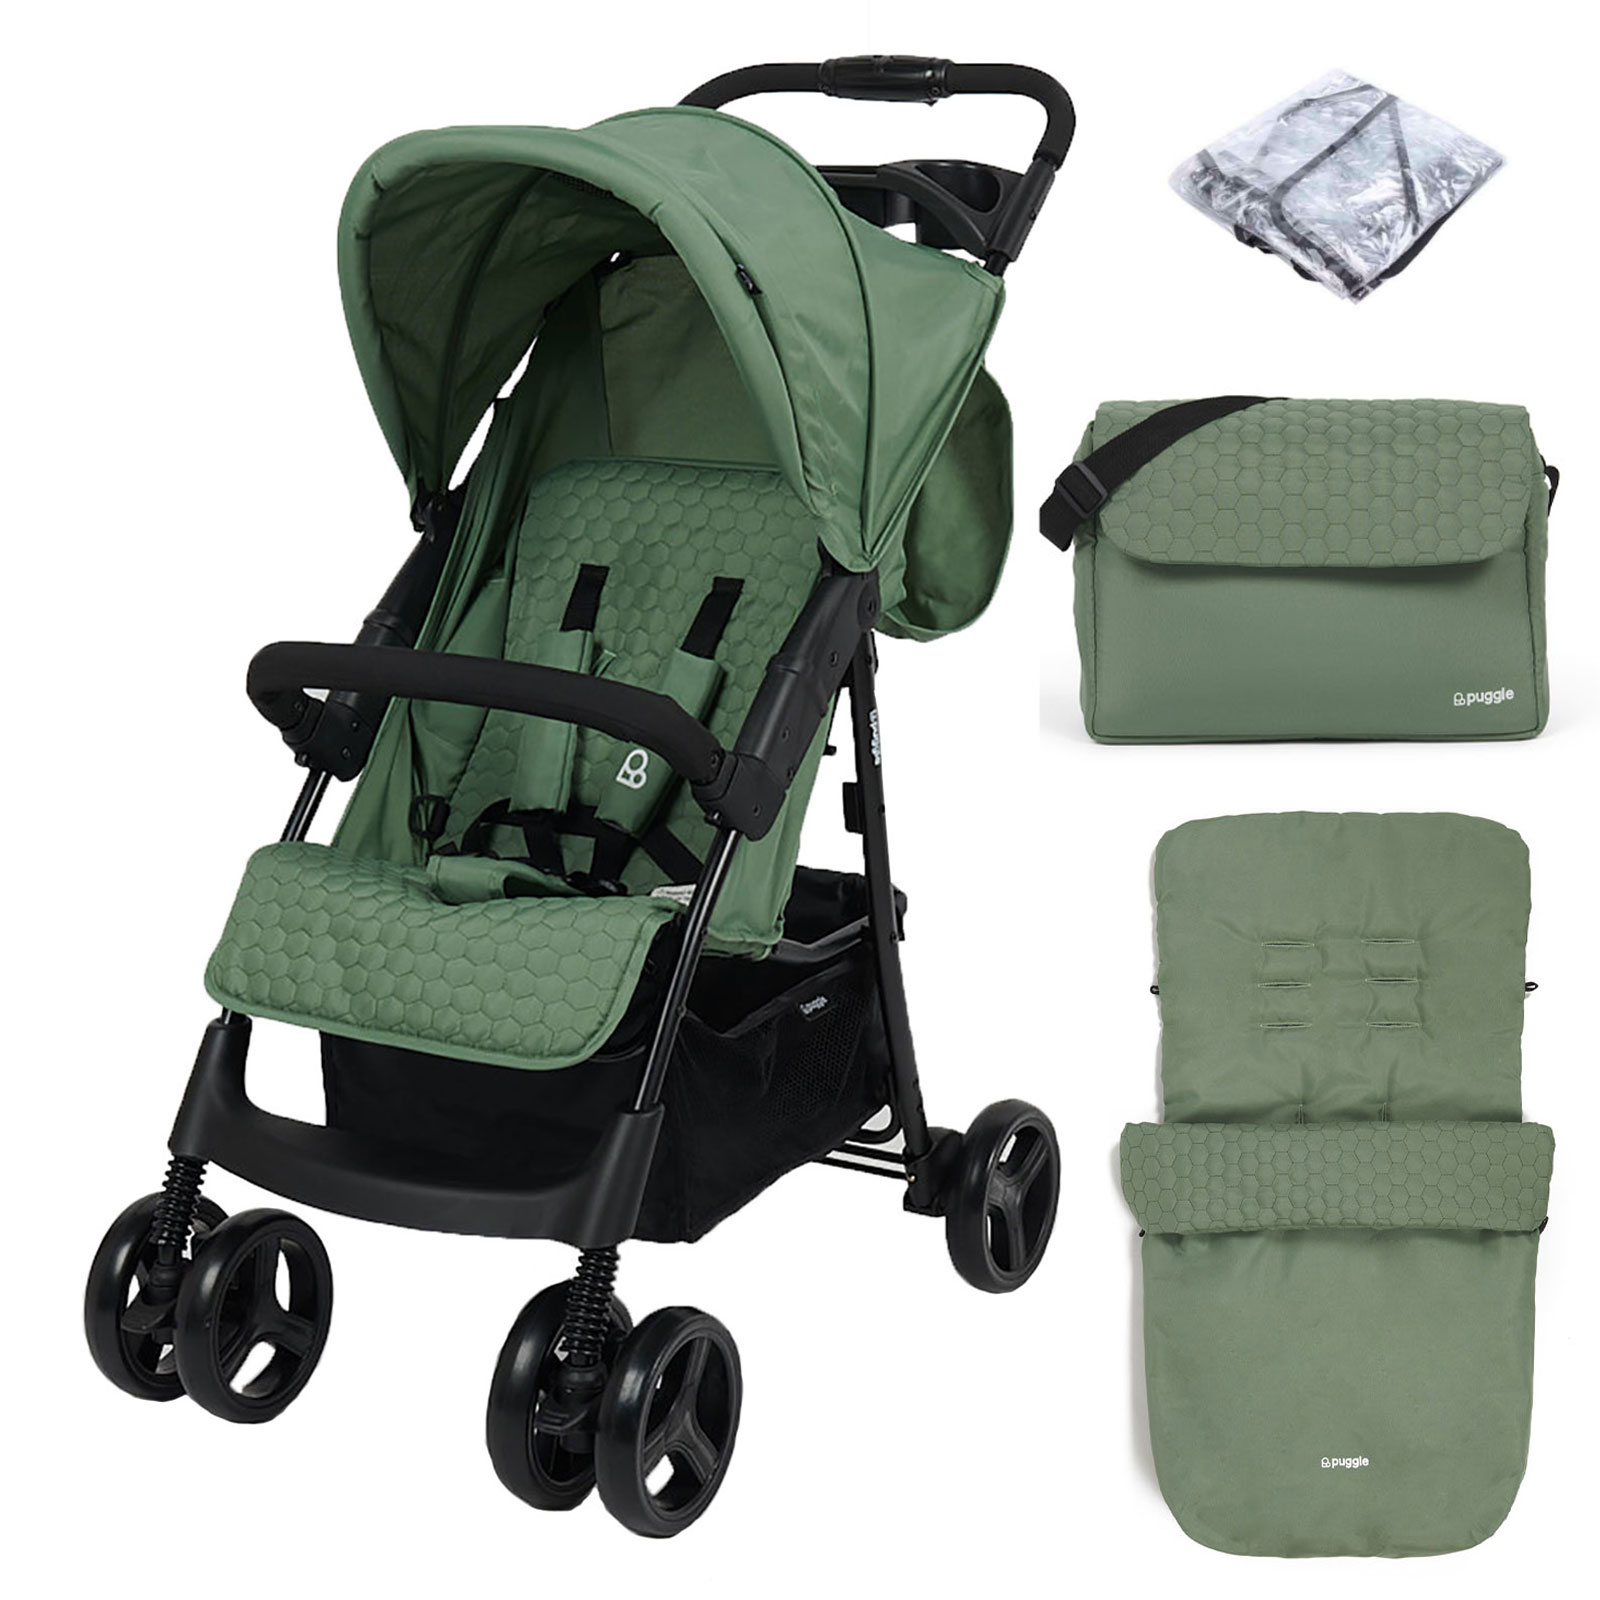 Puggle Starmax Pushchair Stroller with Raincover, Universal Footmuff and Changing Bag with Mat – Sage Green